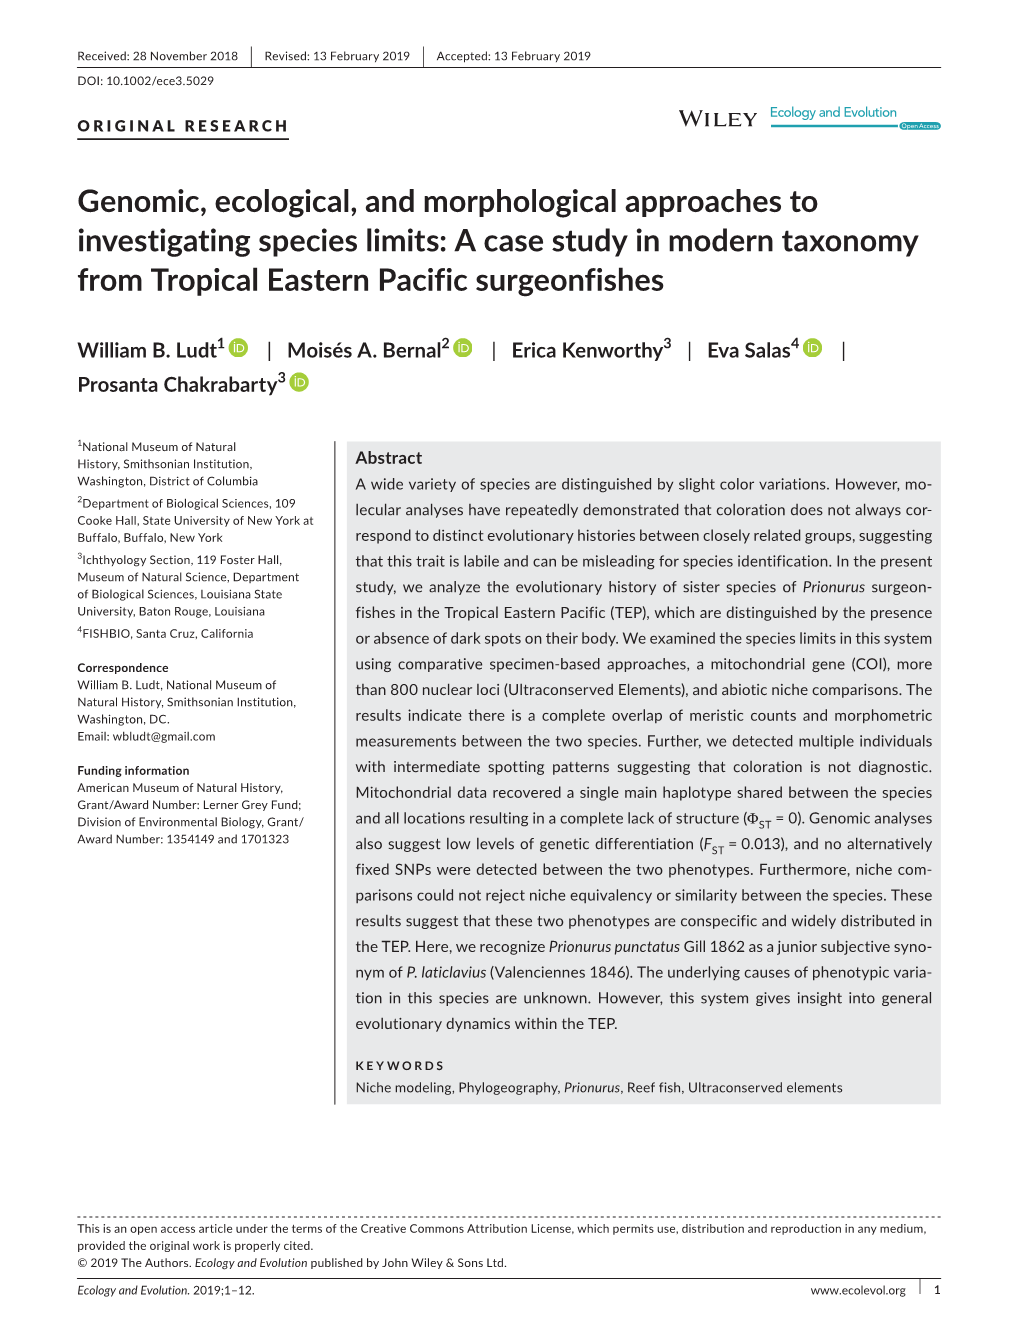 Genomic, Ecological, and Morphological Approaches to Investigating Species Limits: a Case Study in Modern Taxonomy from Tropical Eastern Pacific Surgeonfishes